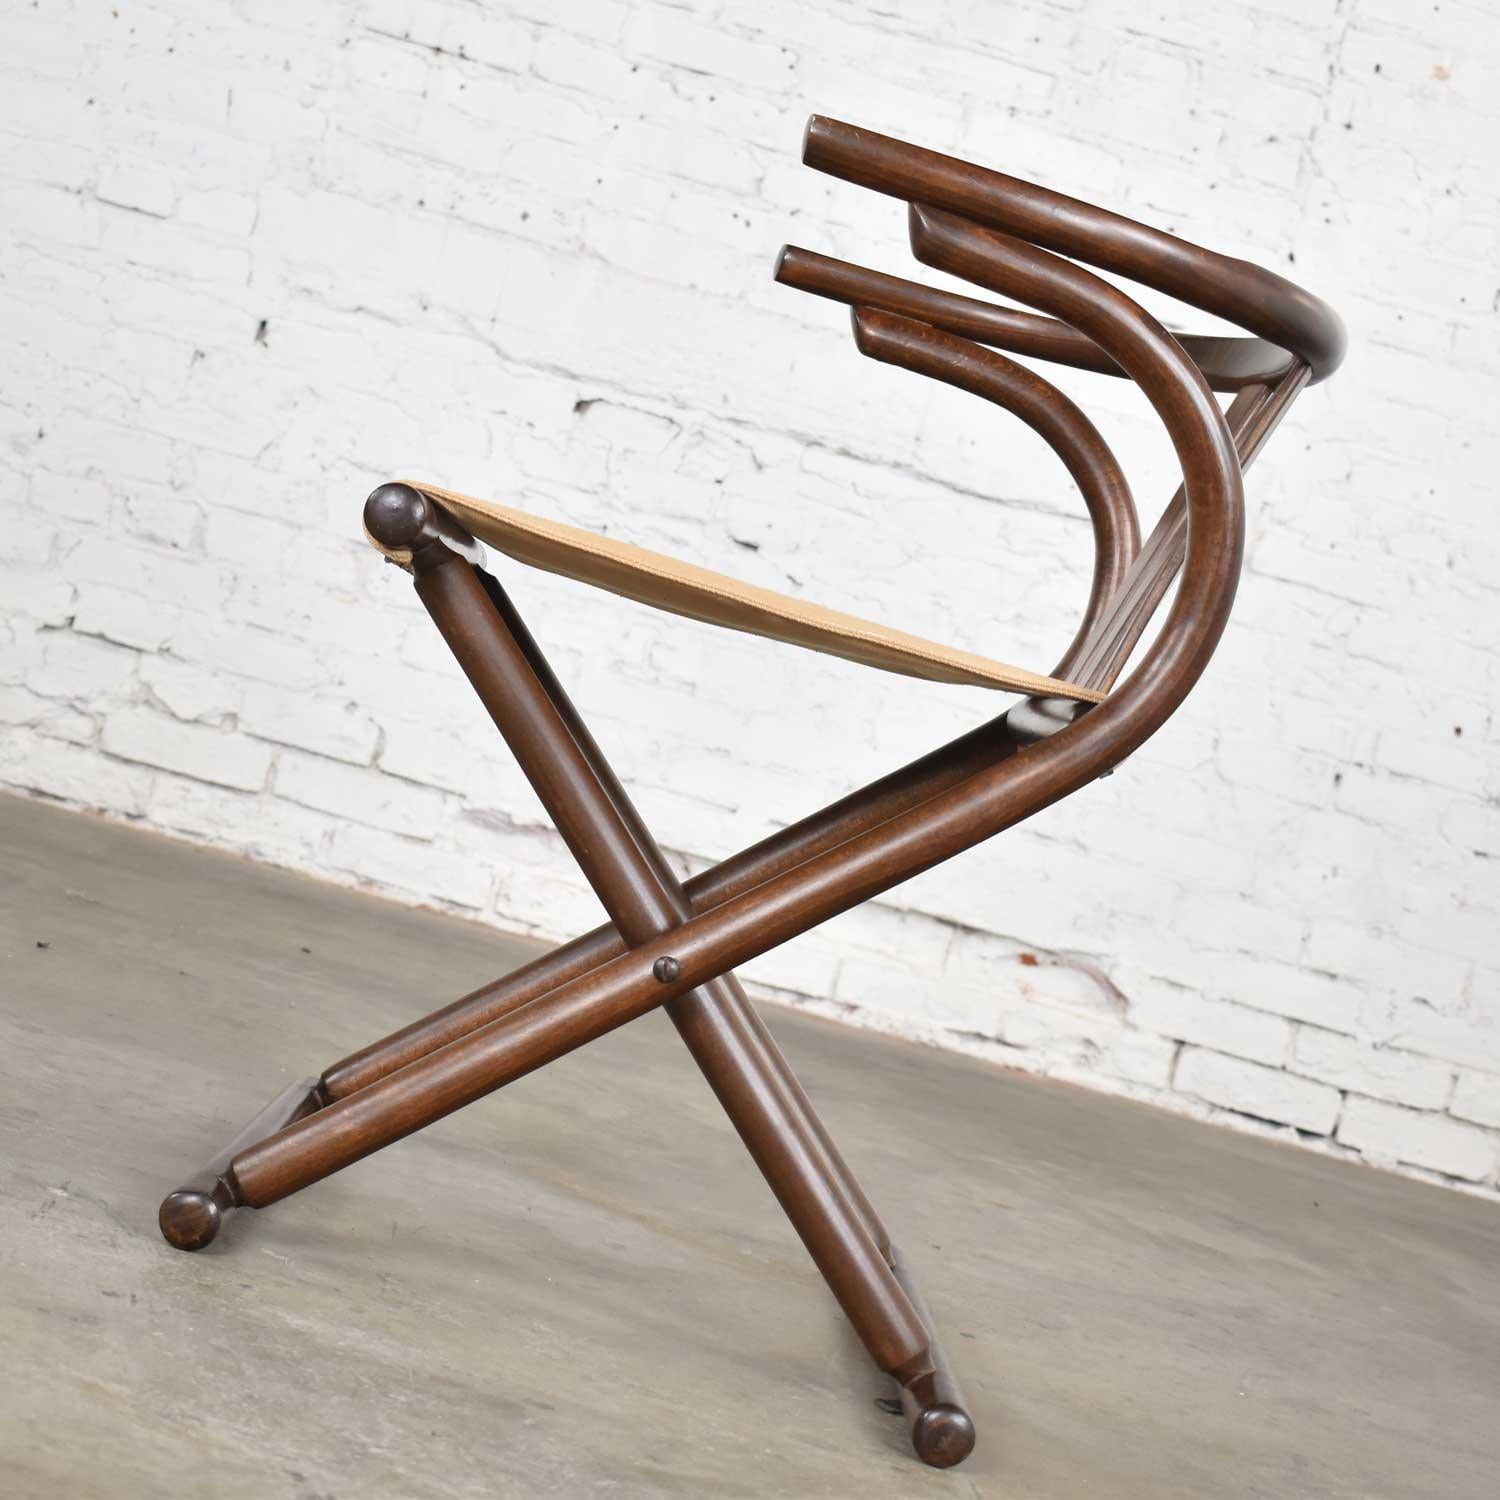 Romanian Thonet Style Bentwood Walnut Tone Folding Chair with Canvas Sling Seat, Romania